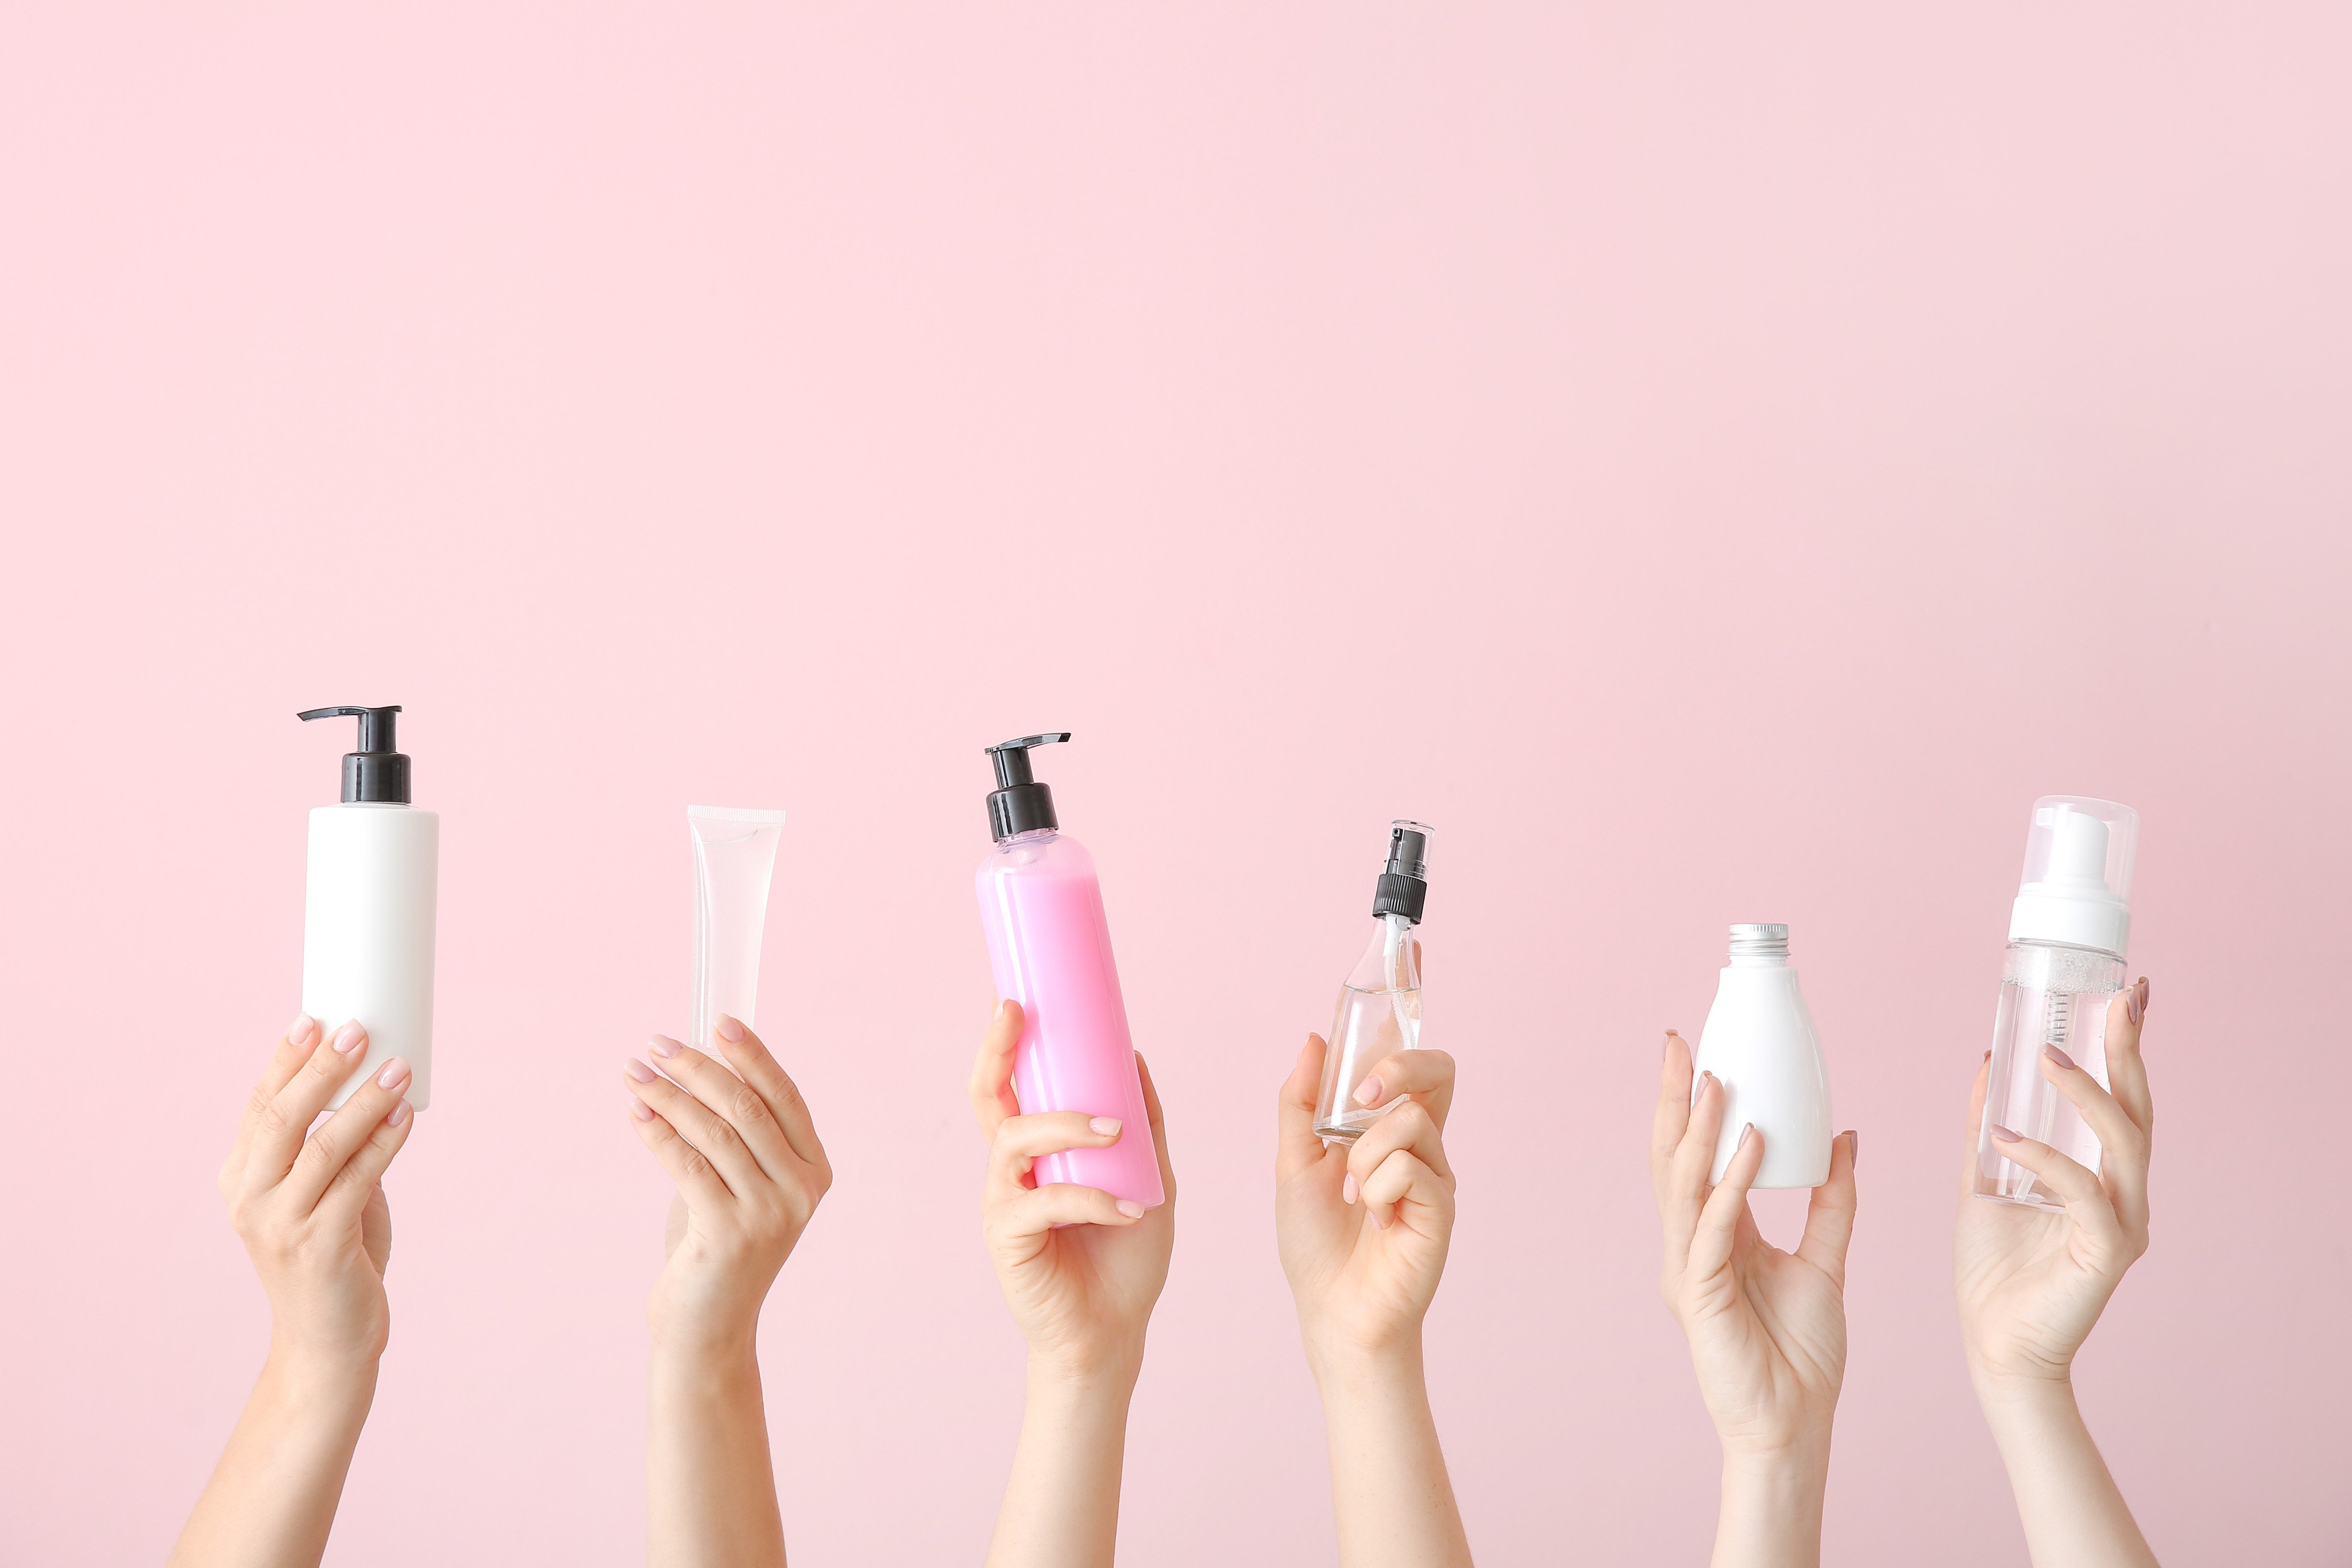 C-beauty brands accounted for 28 per cent of retail sales among the top 20 brands sold in China last year, an increase from 14 per cent in 2017. Photo: Shutterstock Images